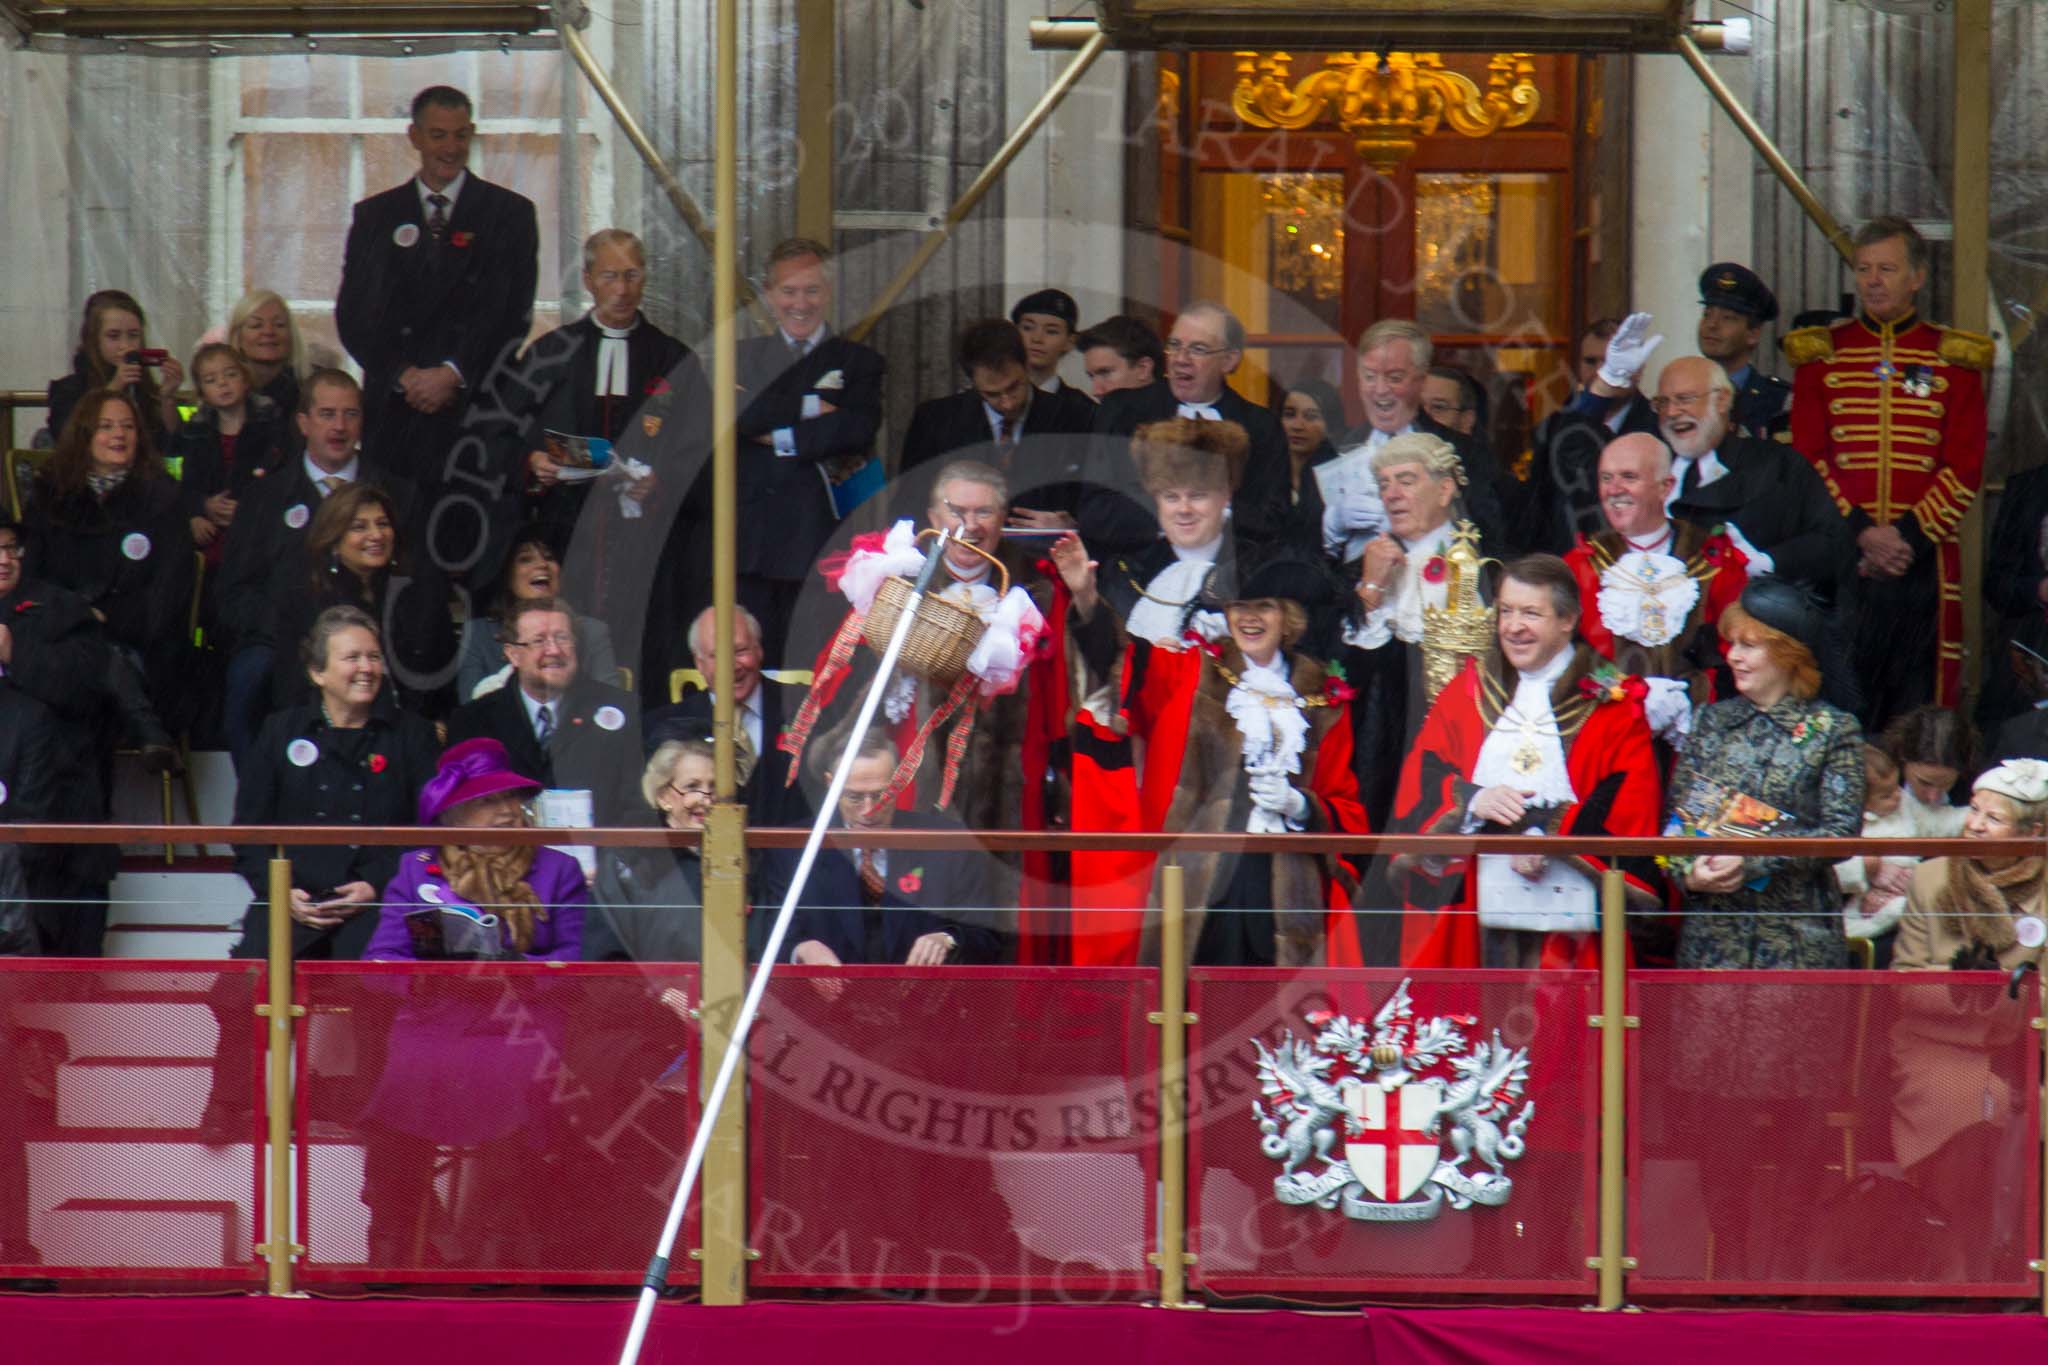 Lord Mayor's Show 2013.
Press stand opposite Mansion House, City of London,
London,
Greater London,
United Kingdom,
on 09 November 2013 at 11:19, image #468